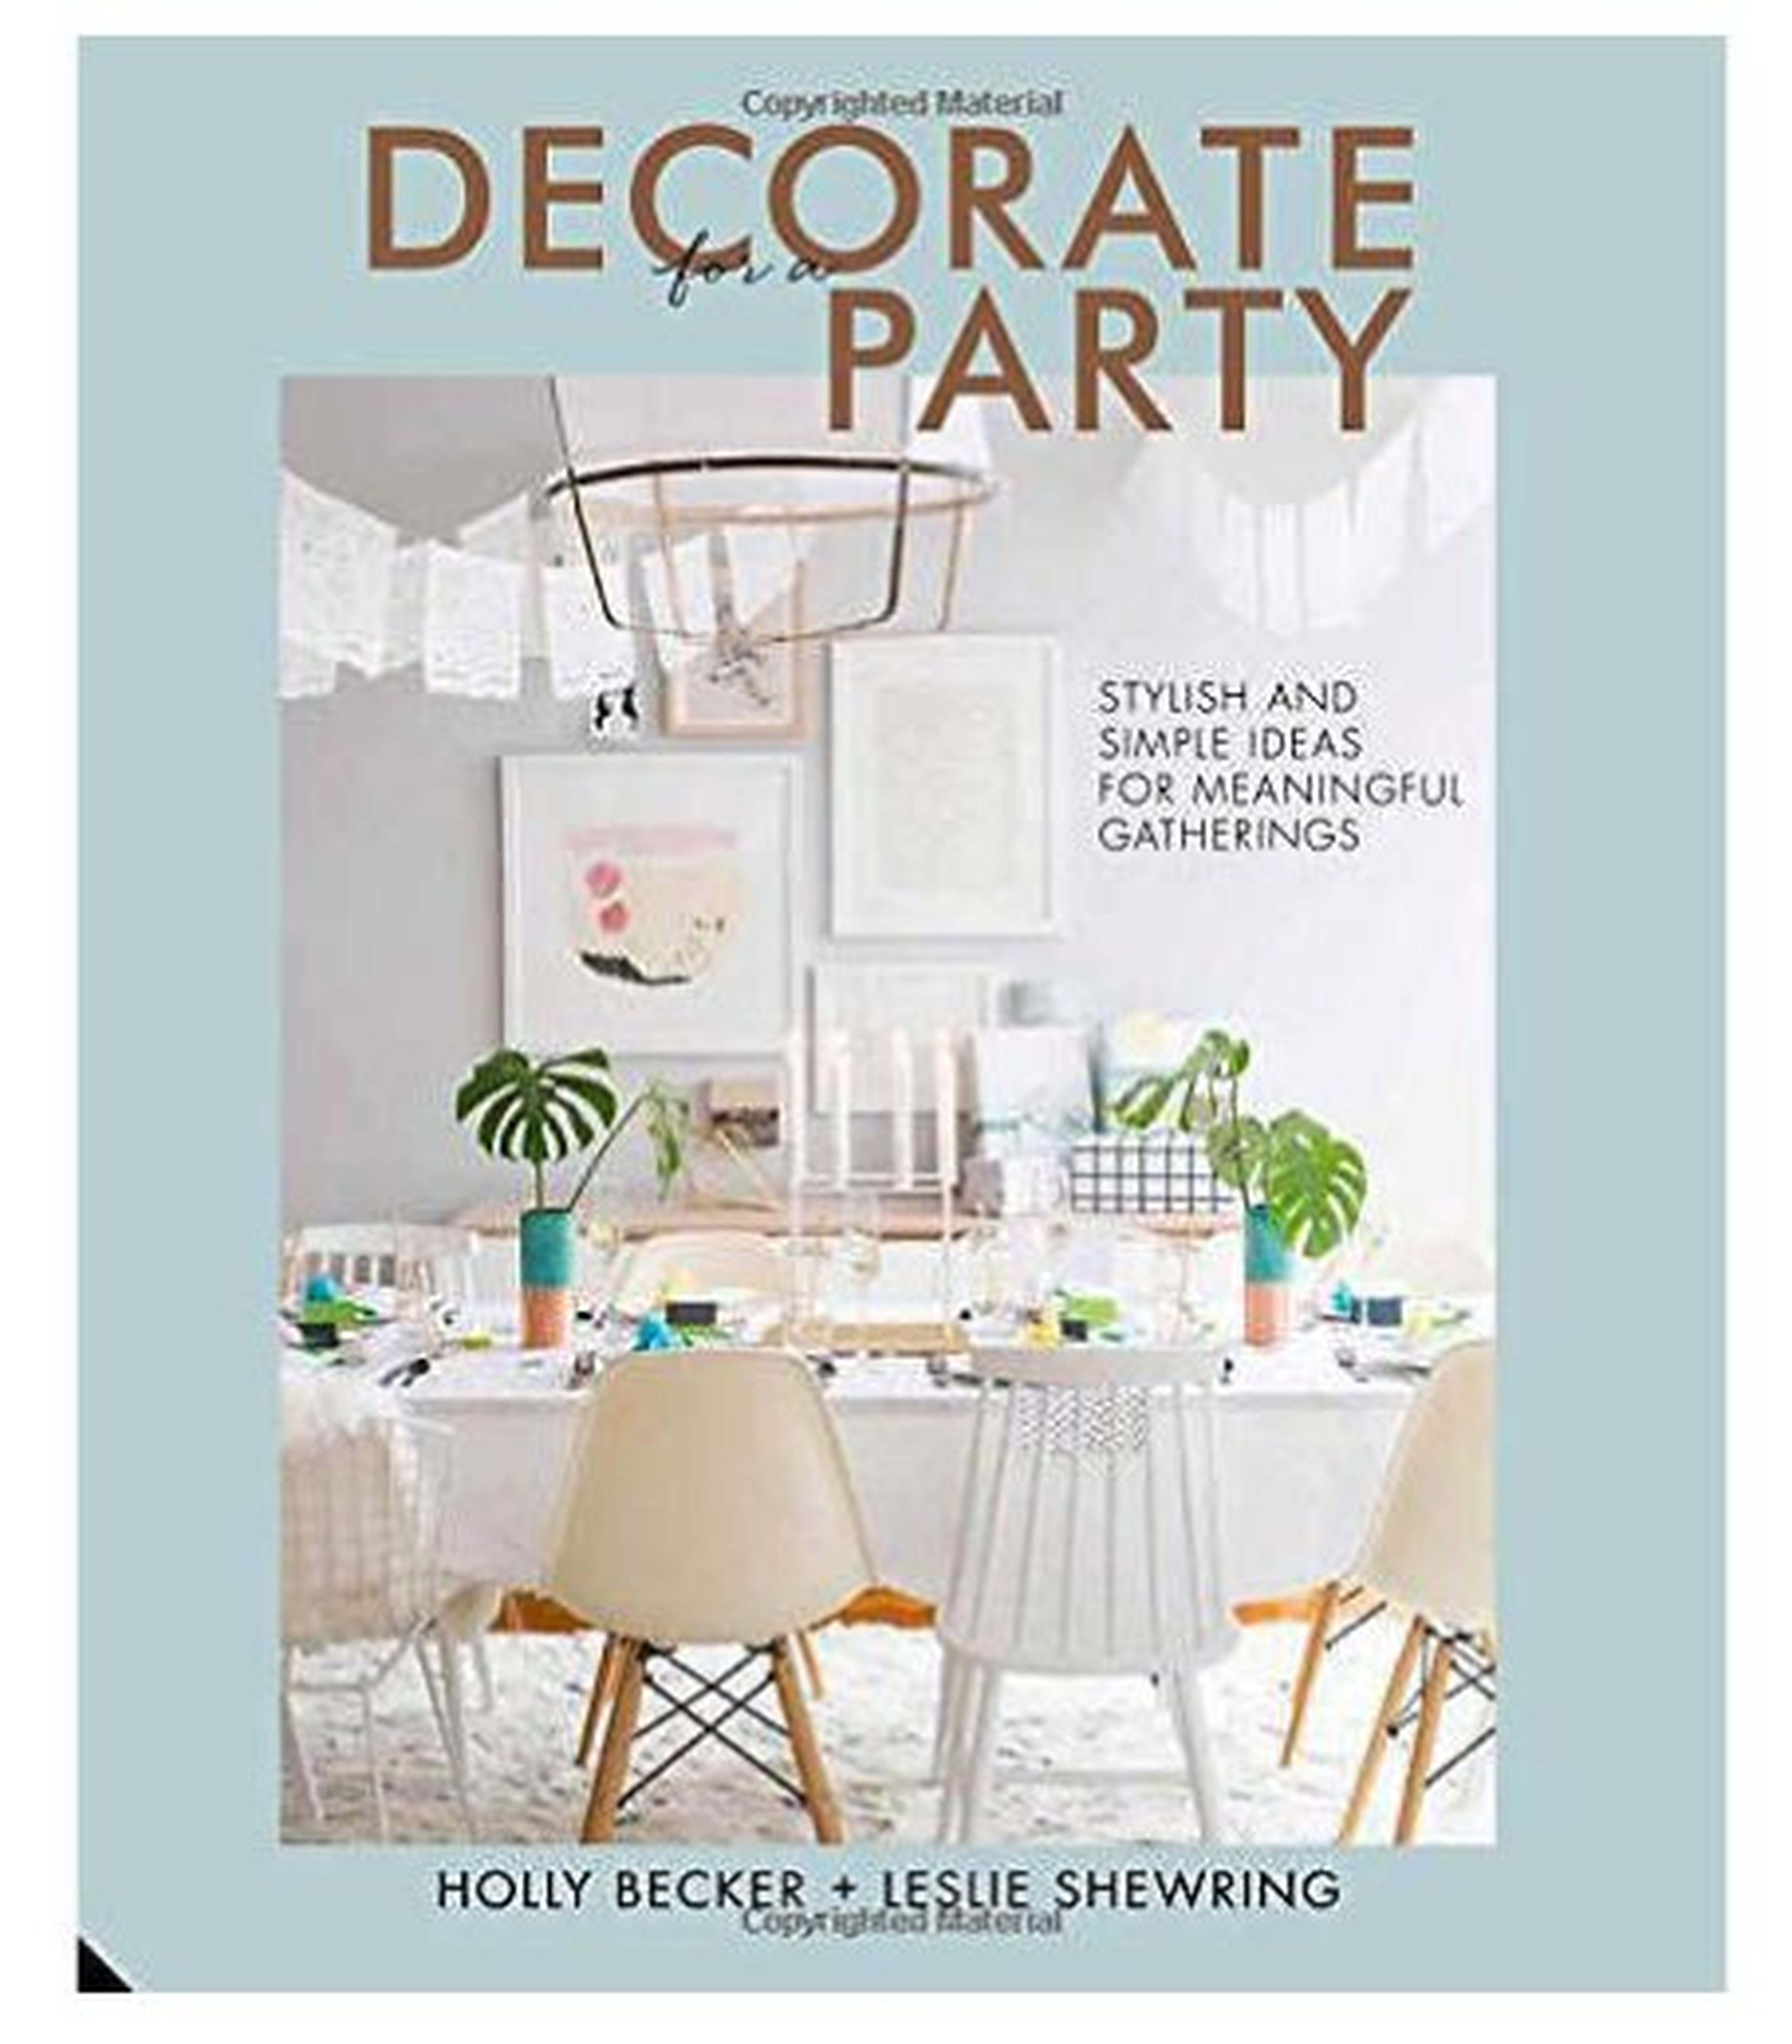 DECORATE FOR A PARTY: STYLISH AND SIMPLE IDEAS FOR MEANINGFUL GATHERINGS BOOK - Dash and Albert